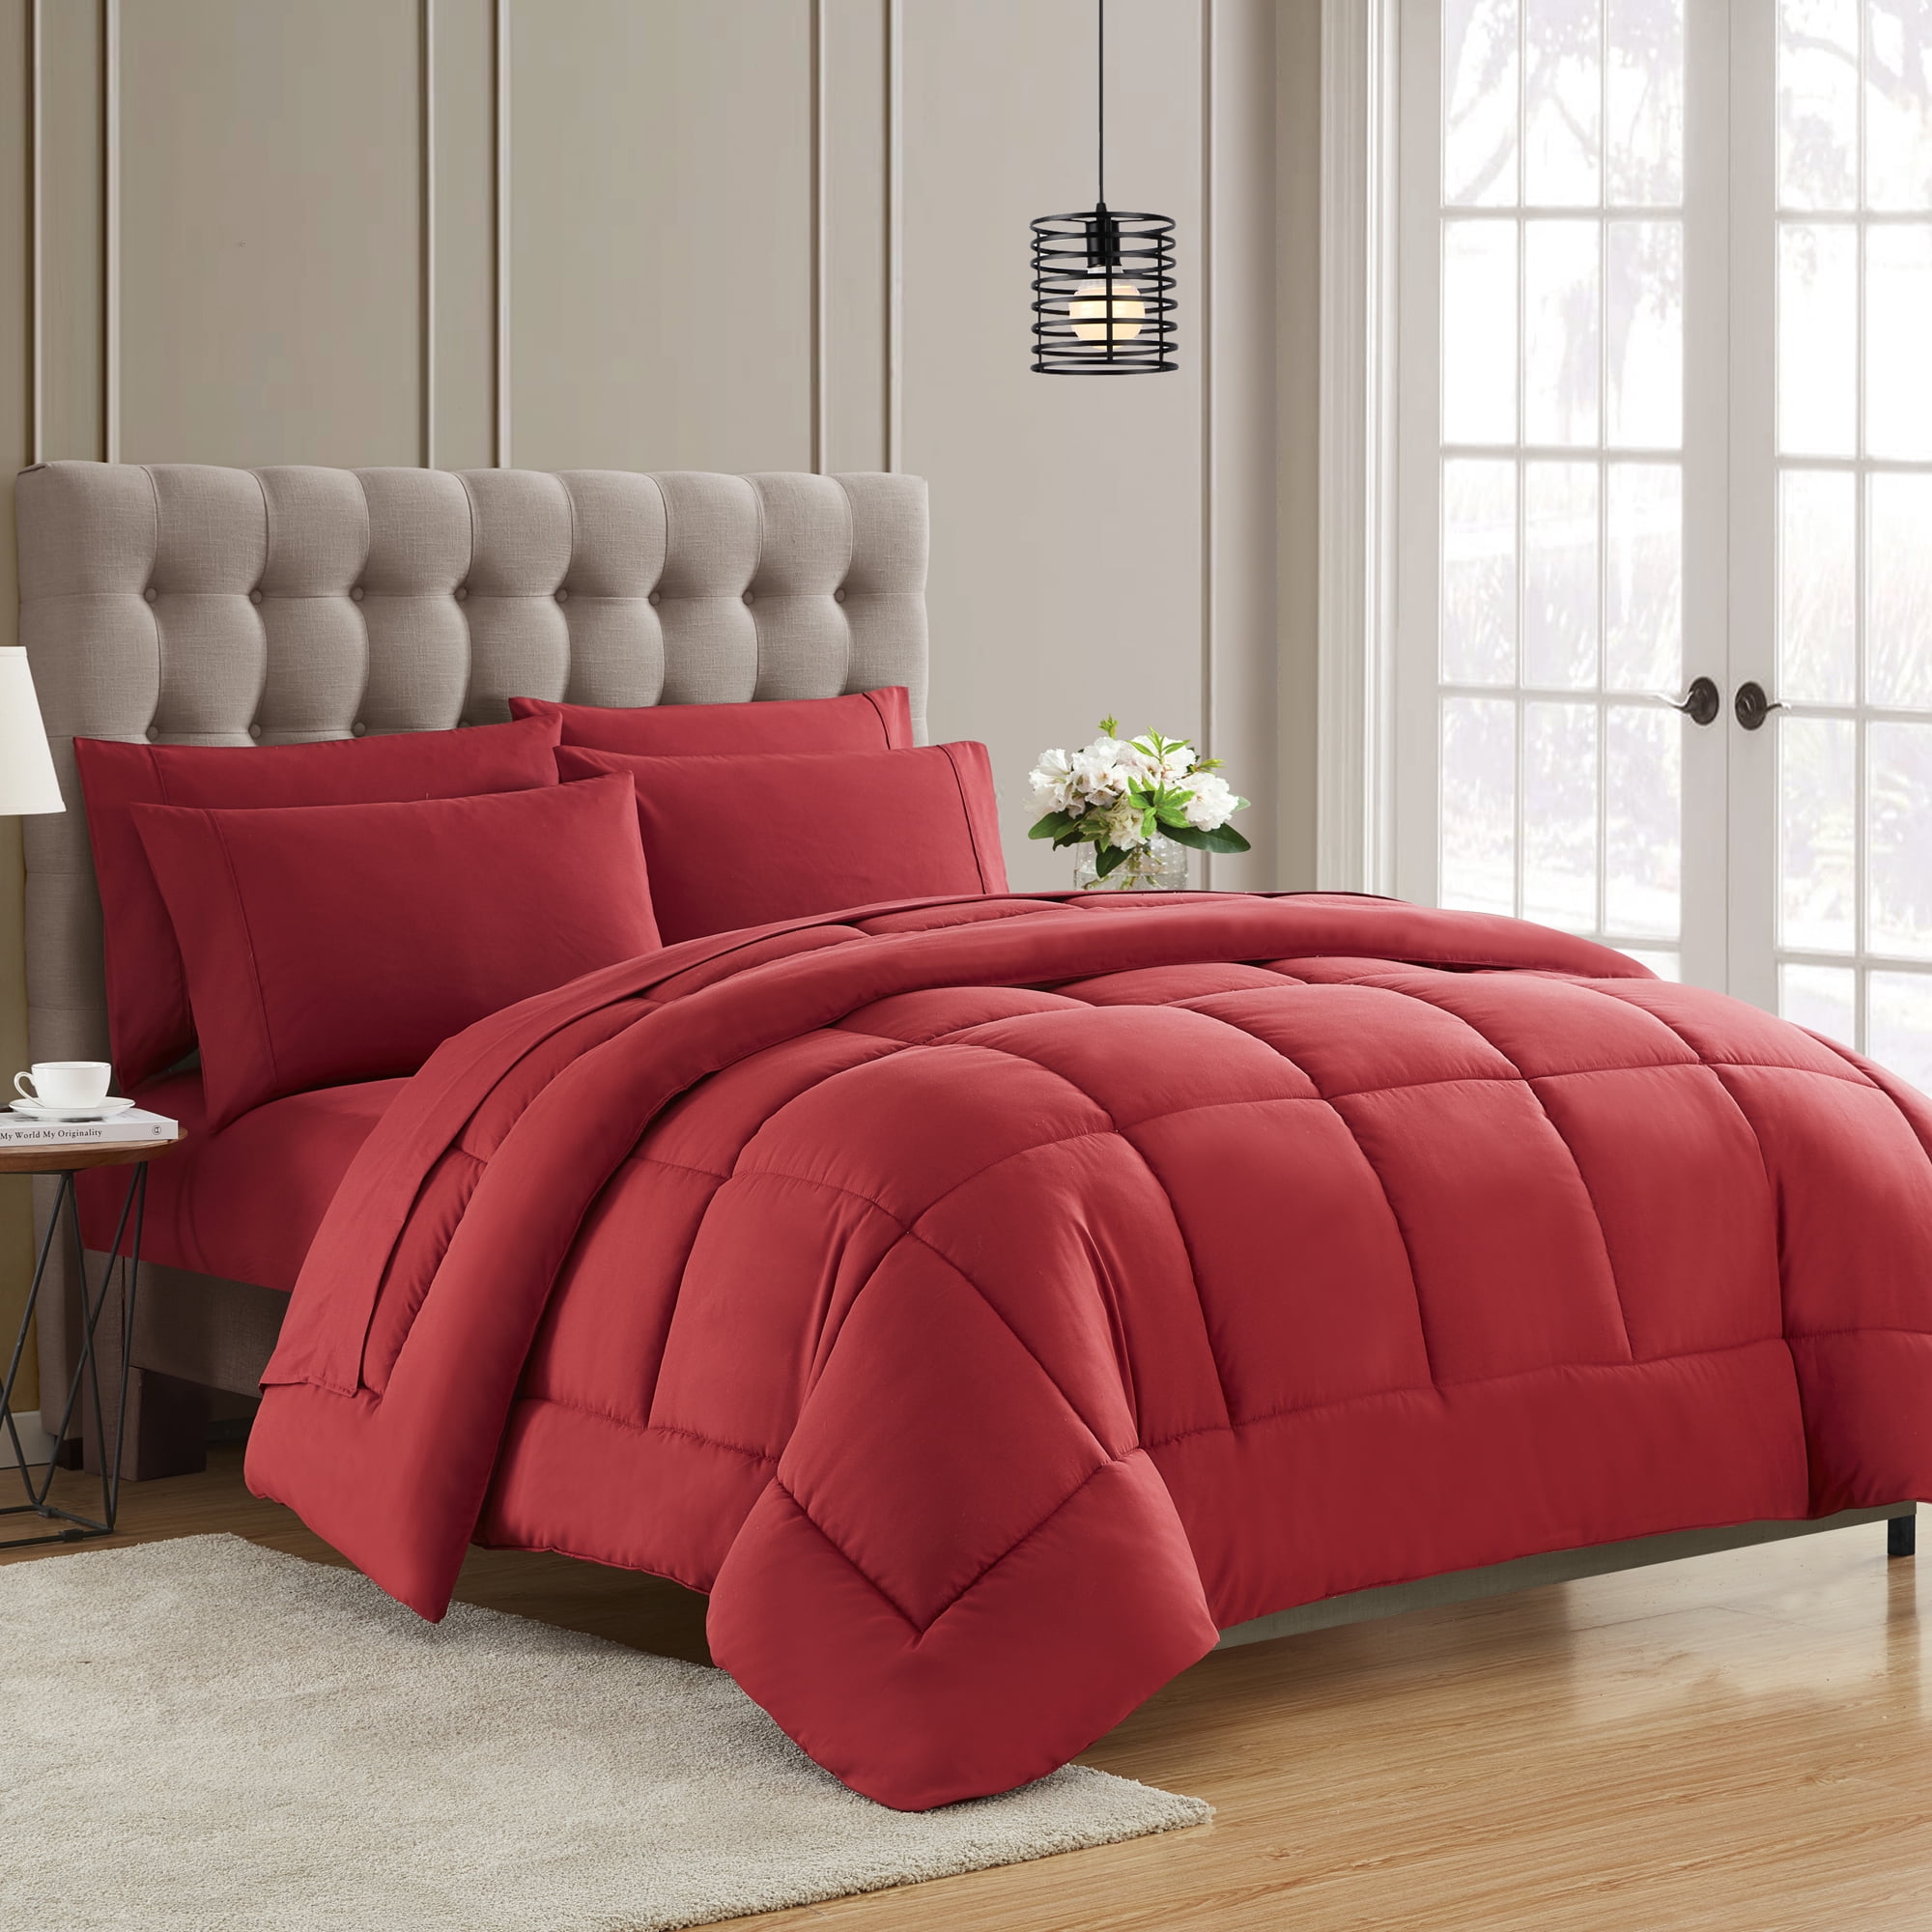 Dark Coral & Rose Wine 5 Piece Dorm Twin XL Reversible Bed In A Bag w/ Comforter 